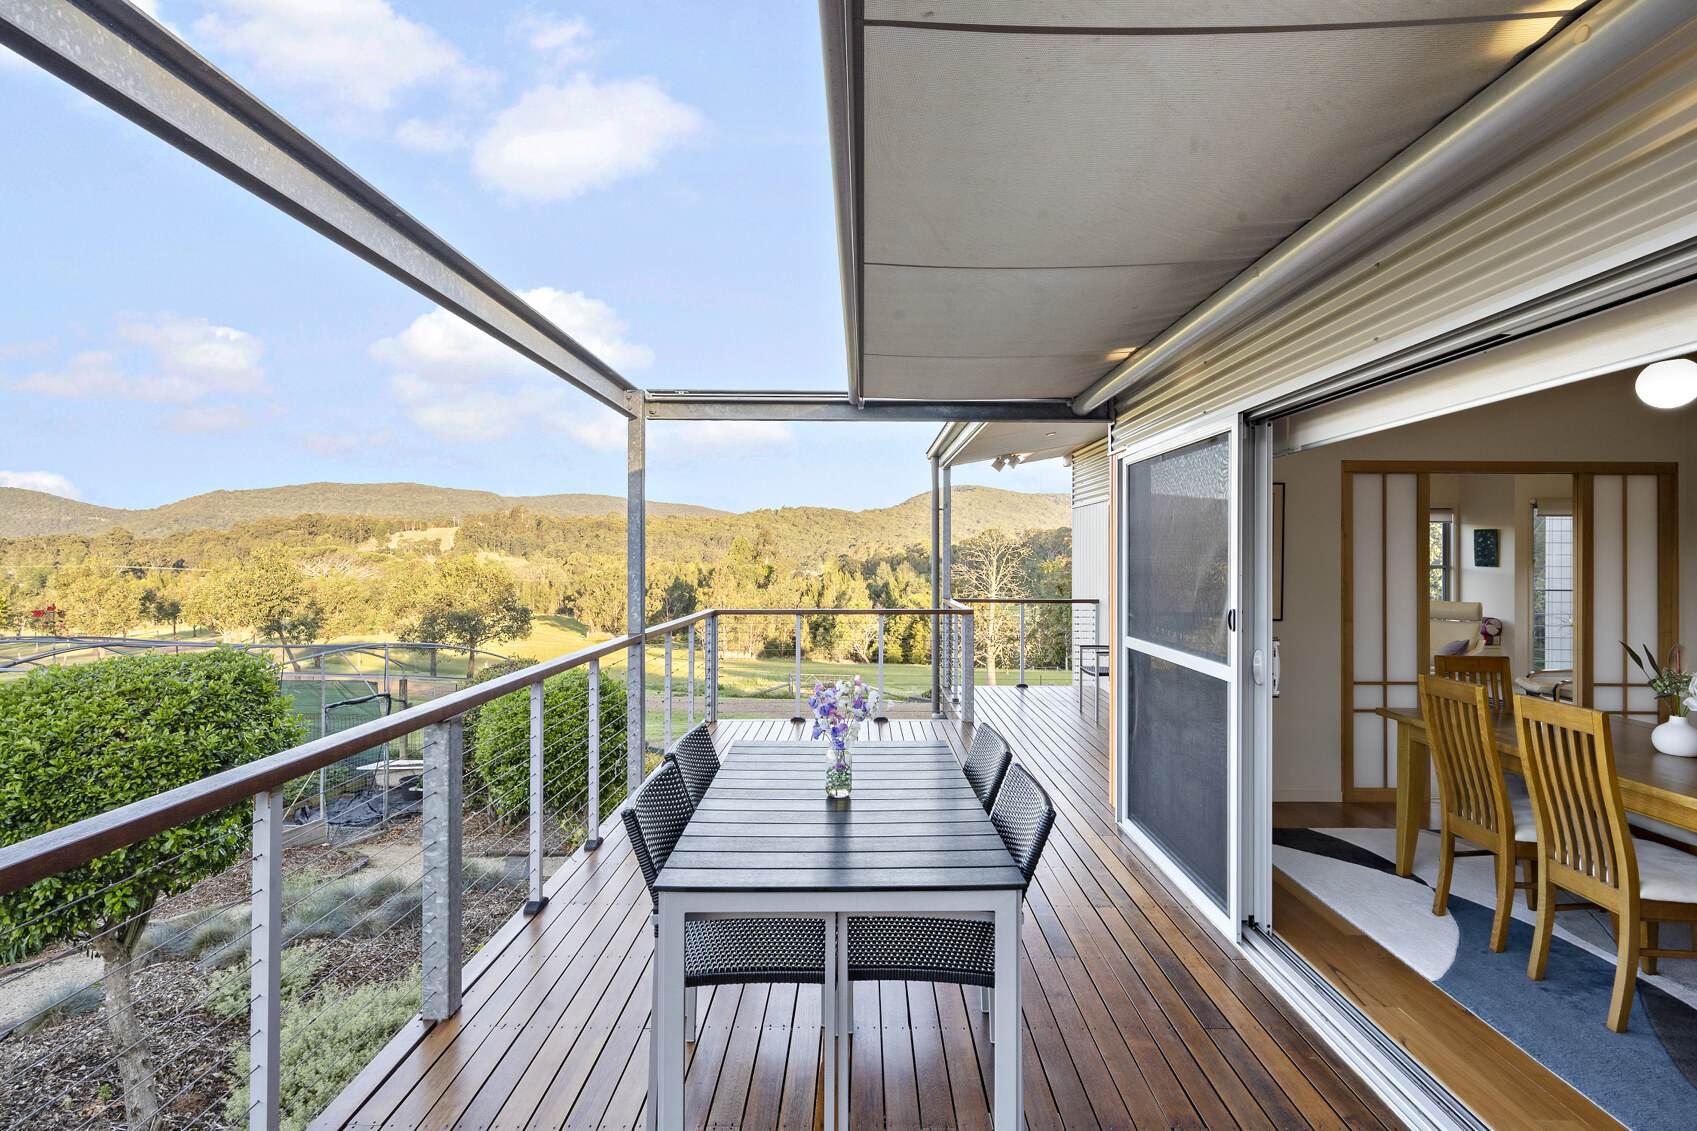 This rural property for sale NSW captures amazing views from every vantage point